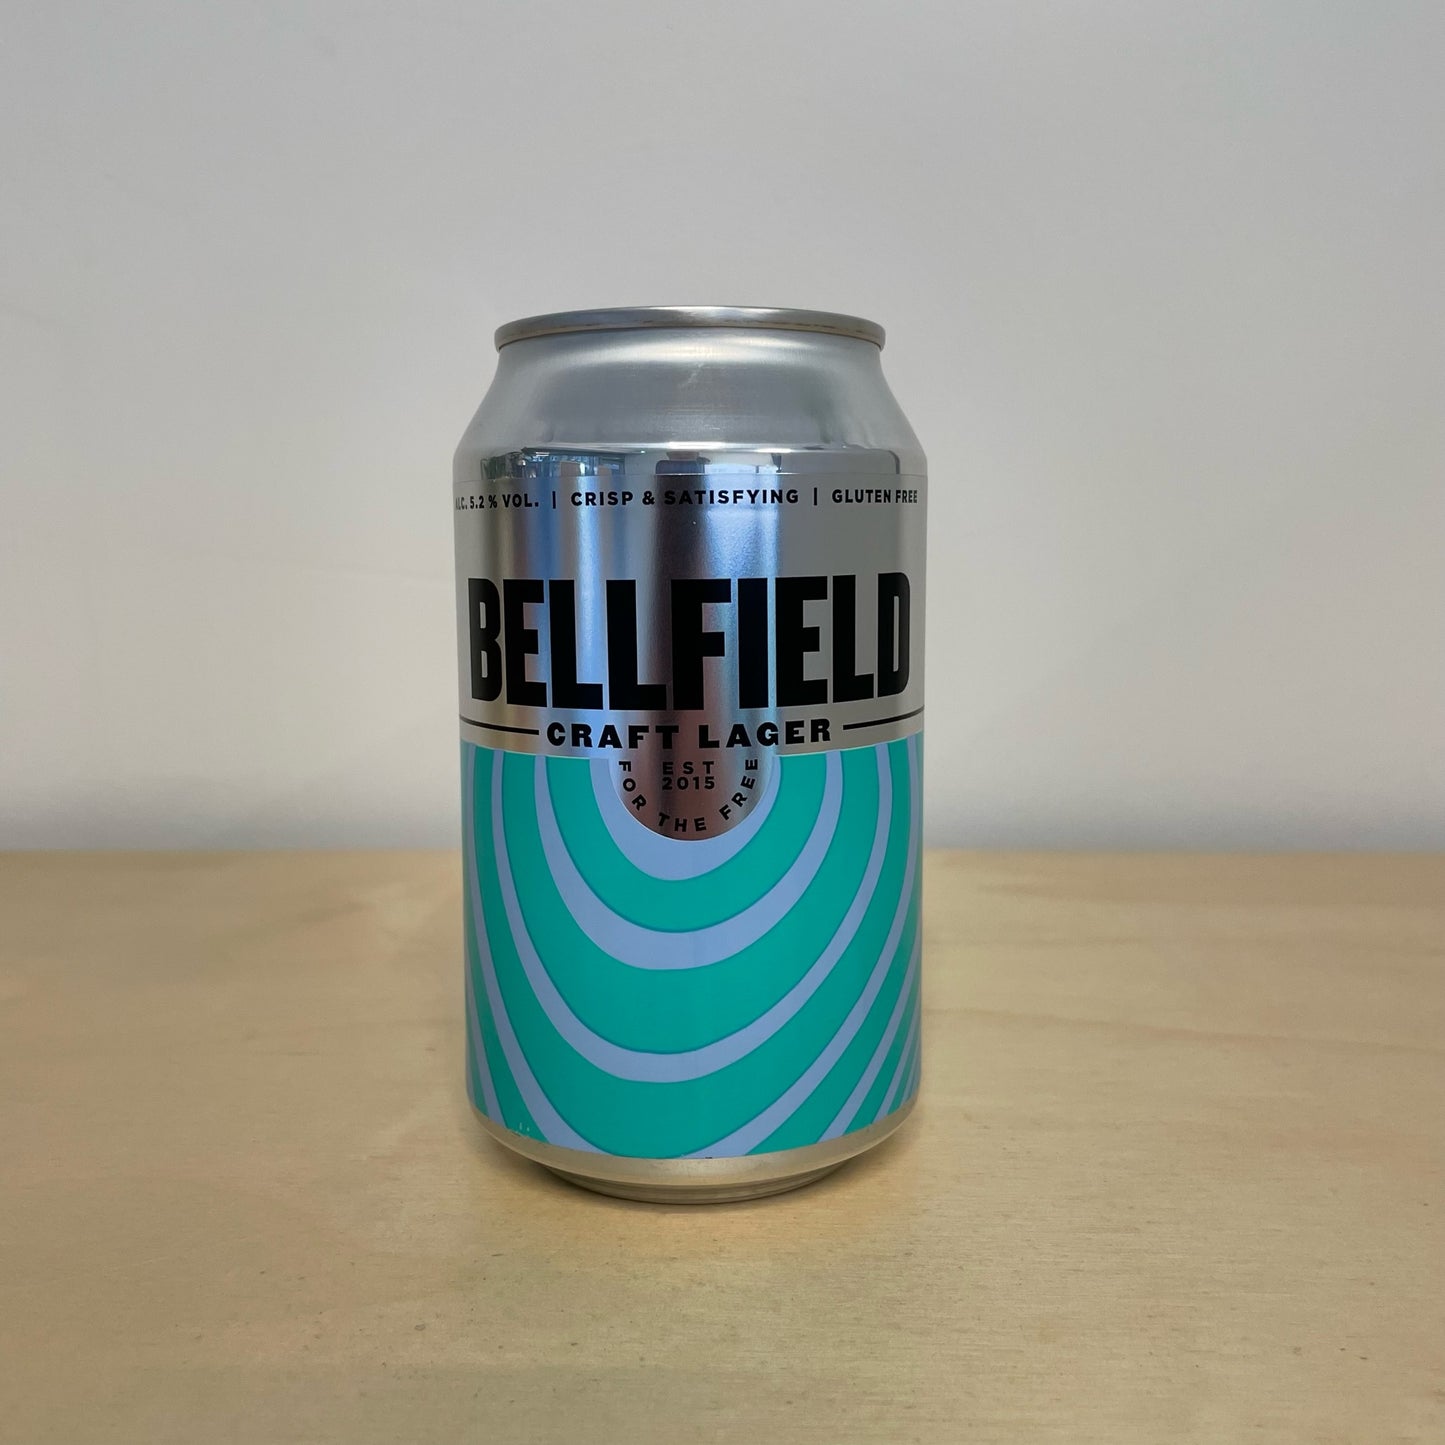 Bellfield Craft Lager (330ml Can)